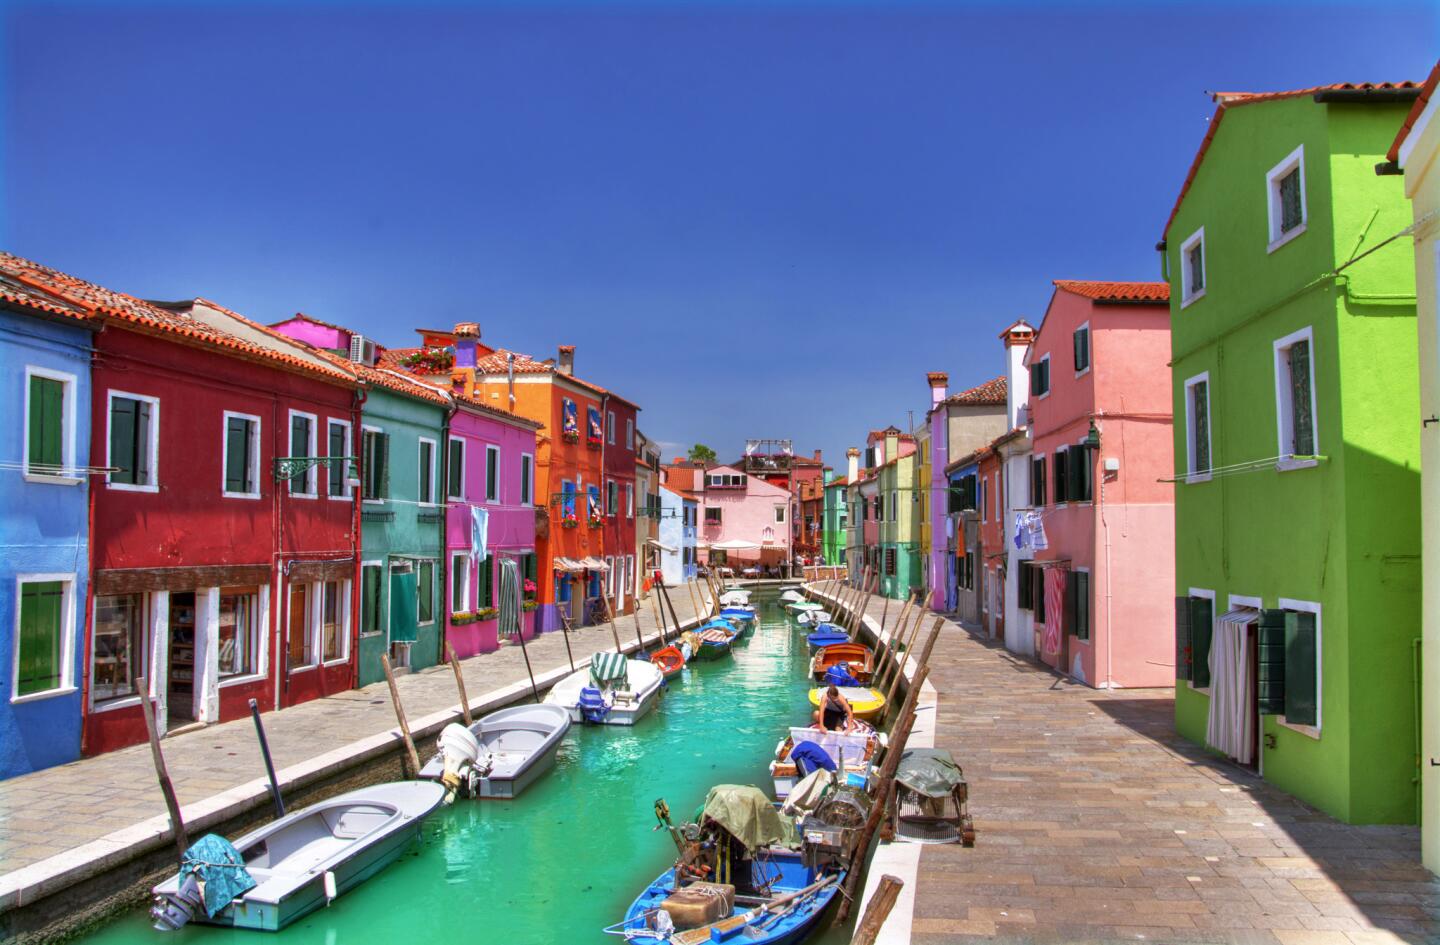 This island town looks more like a Crayola box than a typical Italian village. The vibrant hues date to a time when fishermen used them to find their way home through the fog. Today, the government keeps the tradition going. When homeowners want to paint their house a new color, they have to get government approval.